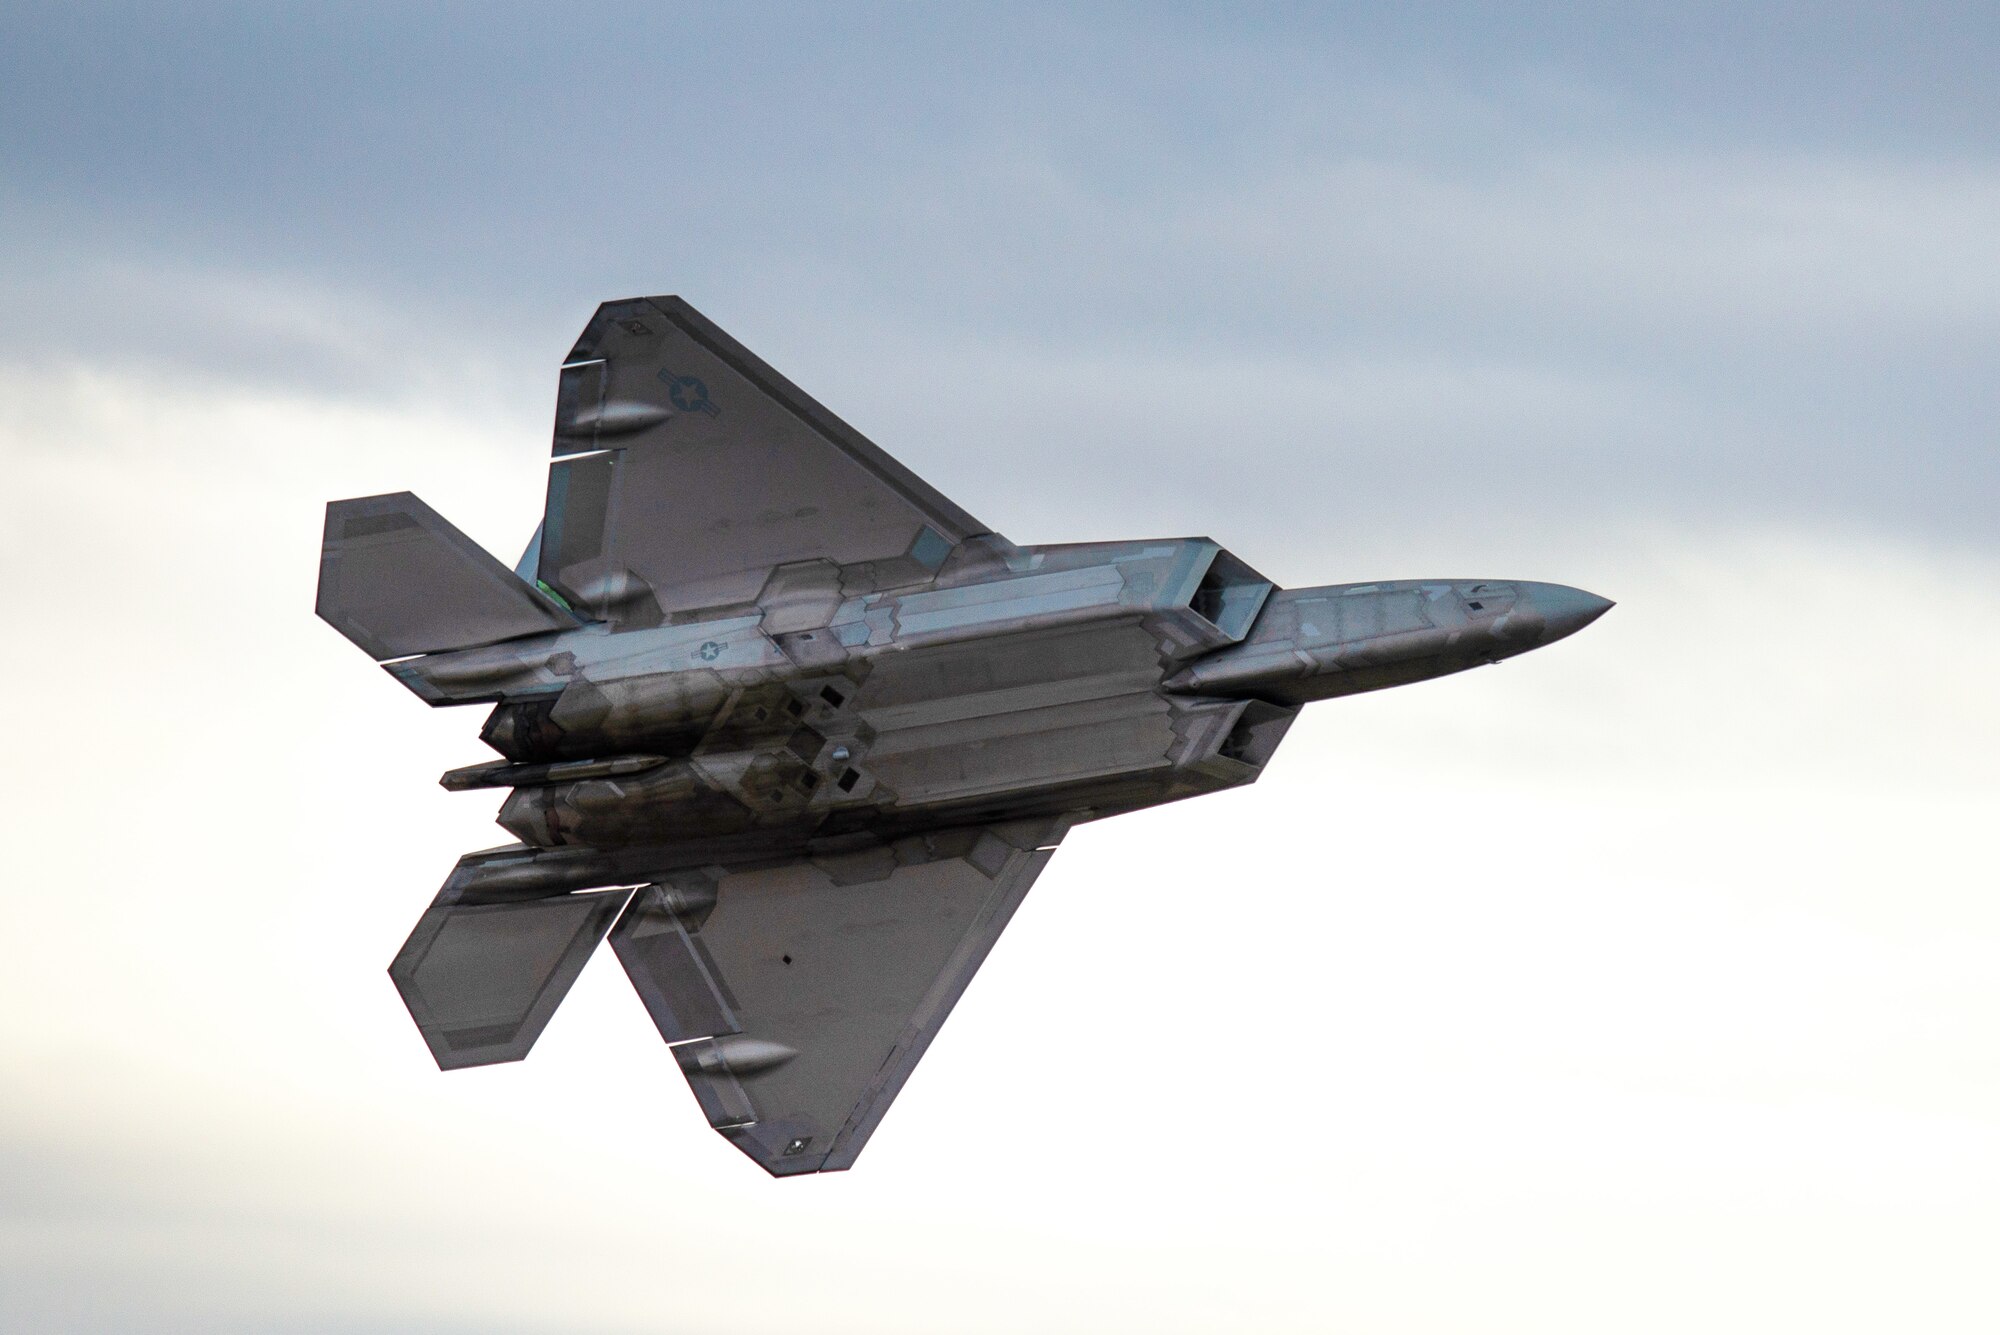 U.S. Air Force Capt. Andrew "Dojo" Olson, F-35 Demo Team pilot and commander, flies through the sky over Davis-Monthan Air Force Base, March 2, 2019. Olson flew his new demonstration profile during the five-day Heritage Flight Course. (U.S. Air Force photo by Staff Sgt. Jensen Stidham)